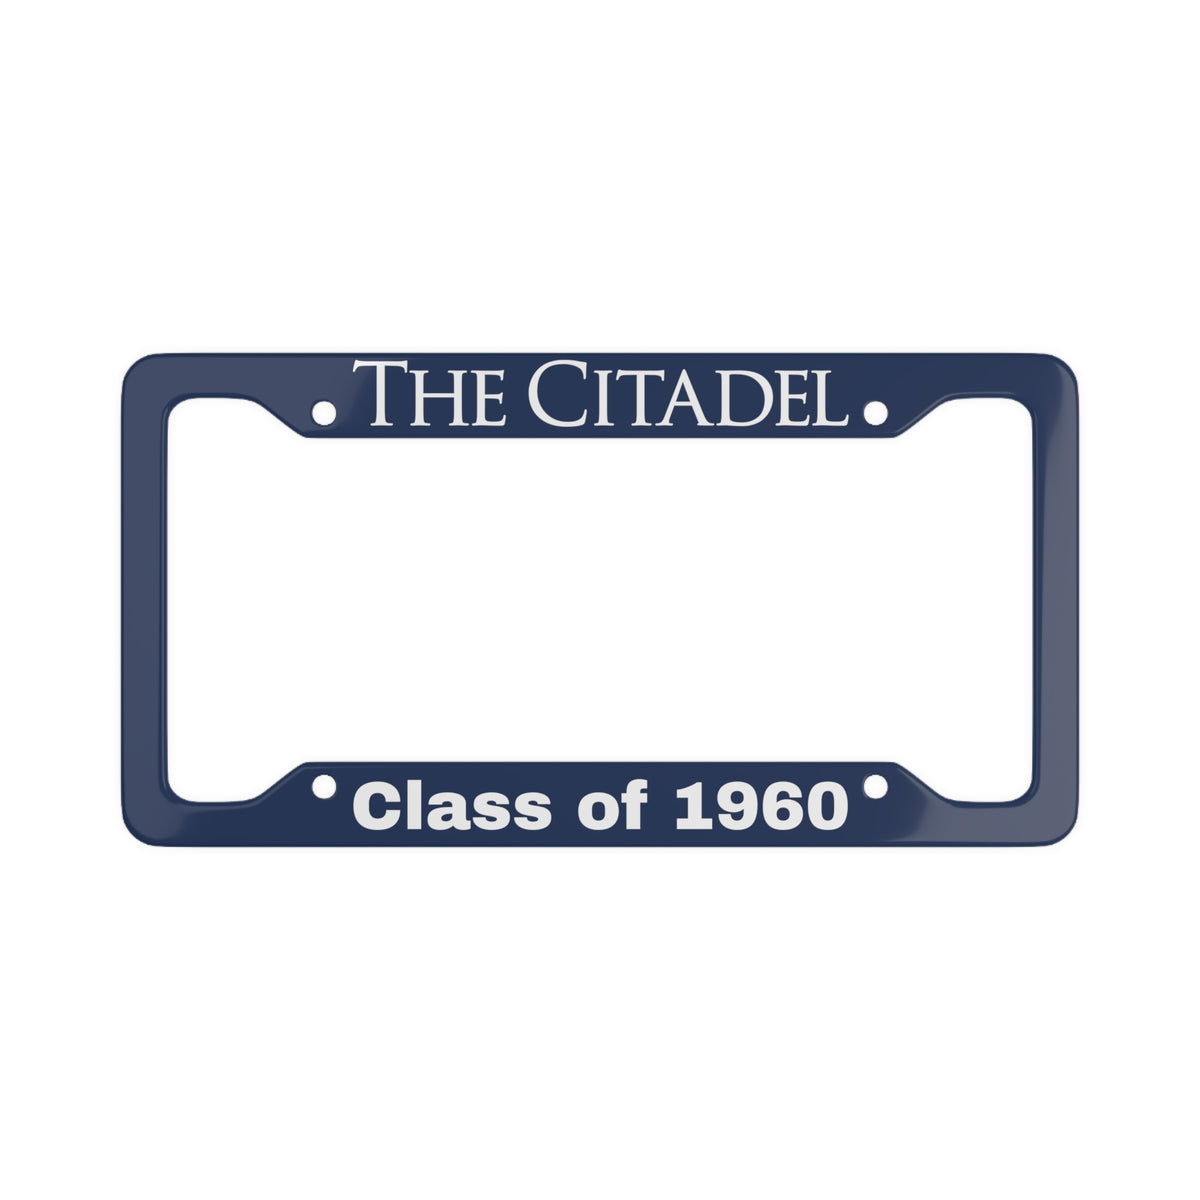 The Citadel, Class of (your year), Customizable License Plate Frame